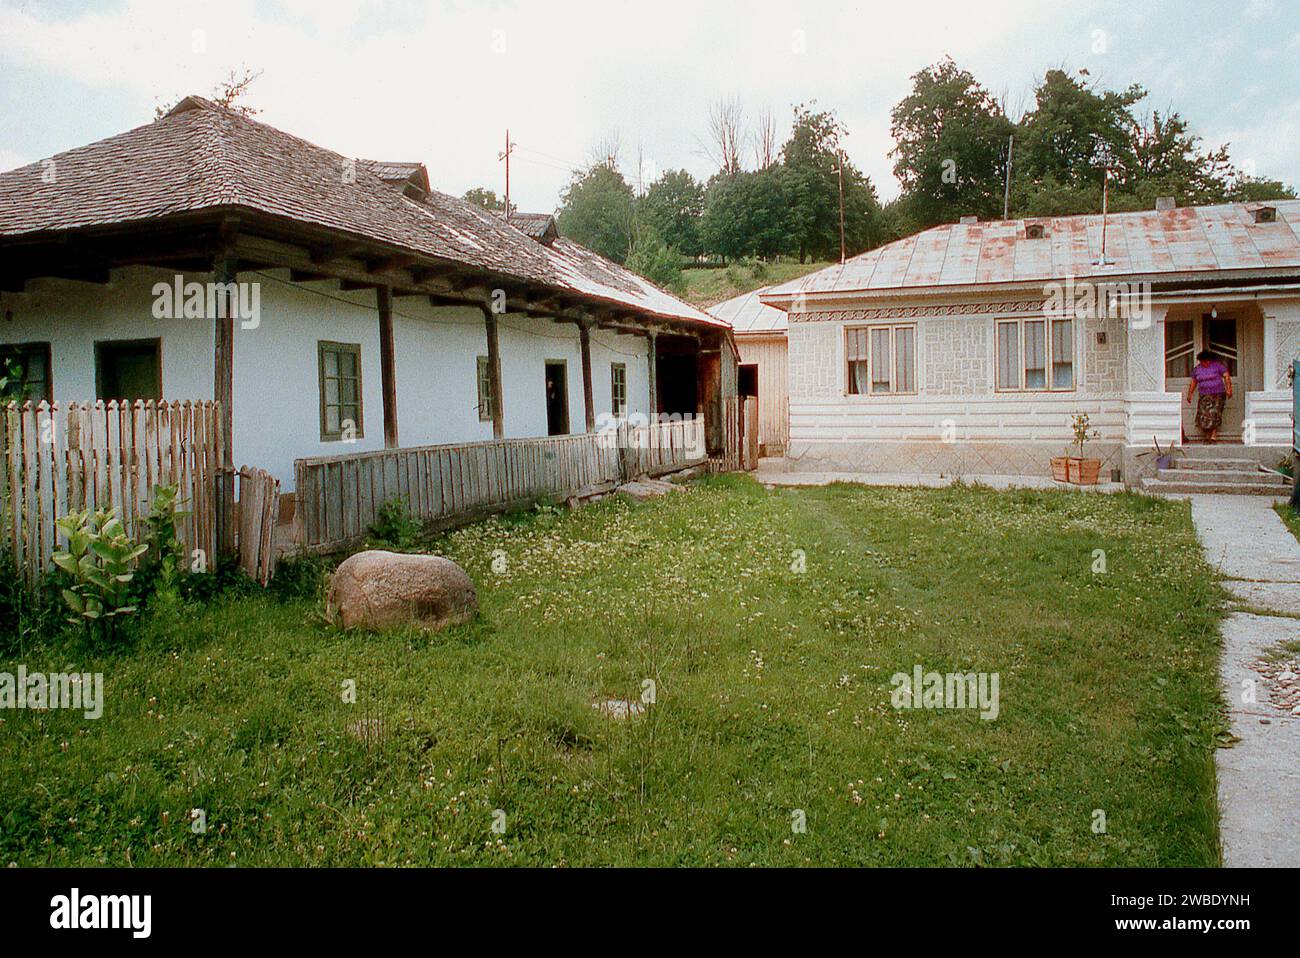 Vrancea County, Romania, approx. 1991. A homestead with an old simple traditional house on the left (probably late 19th century) and a newer one (probably middle of the 20th century) seen in front. Stock Photo